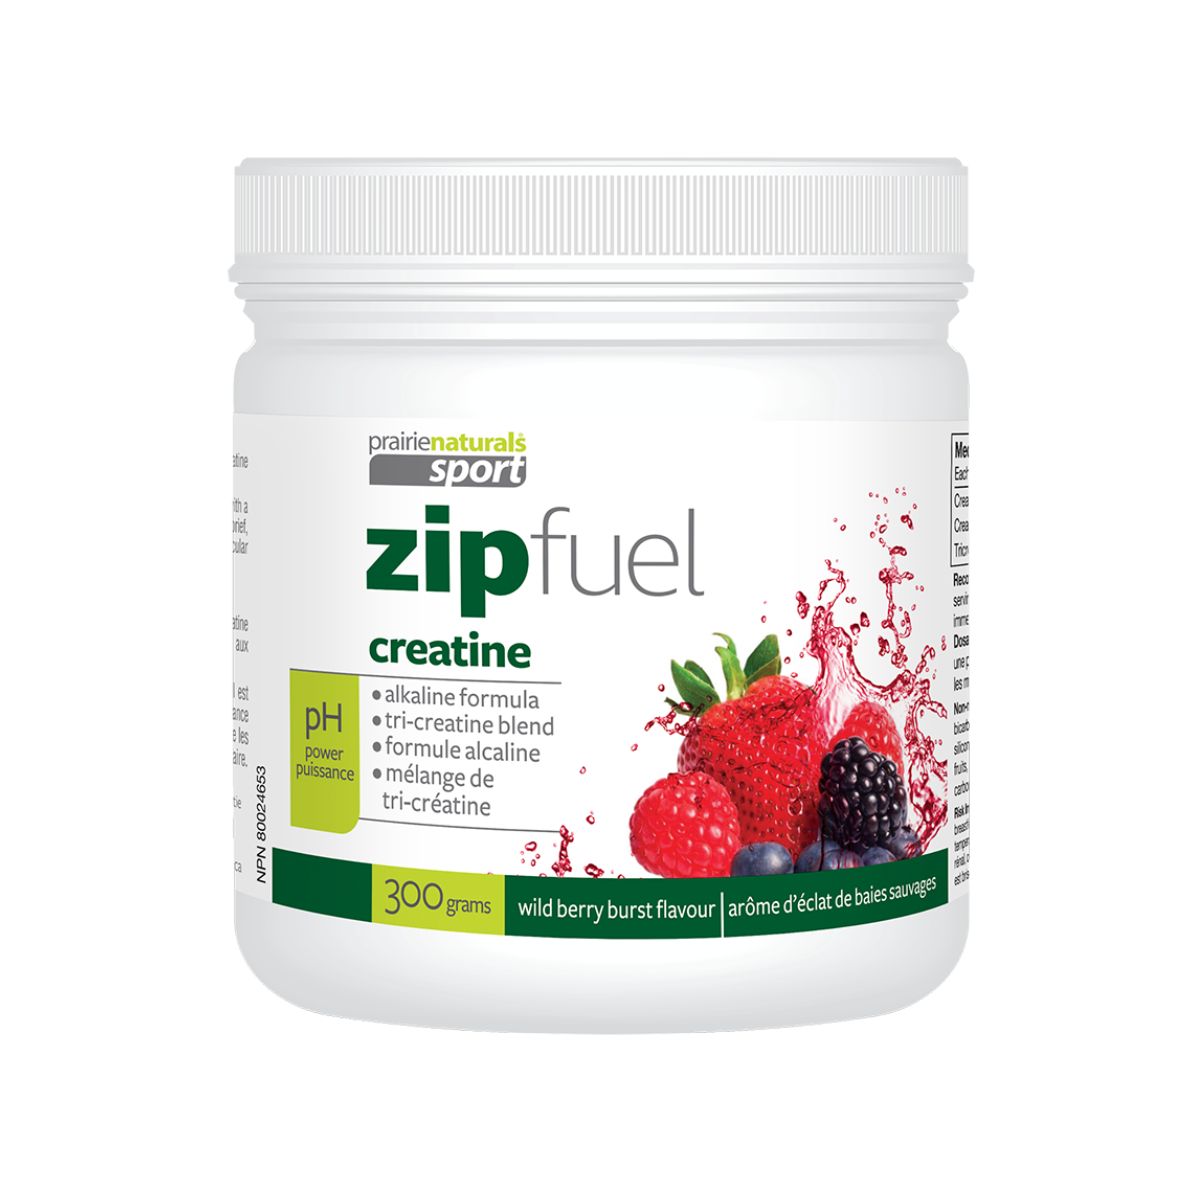 Prairie Naturals ZipFuel Creatine Wild Berry Burst Flavour 300g product image - Fitness supplement in a vibrant purple and green container.